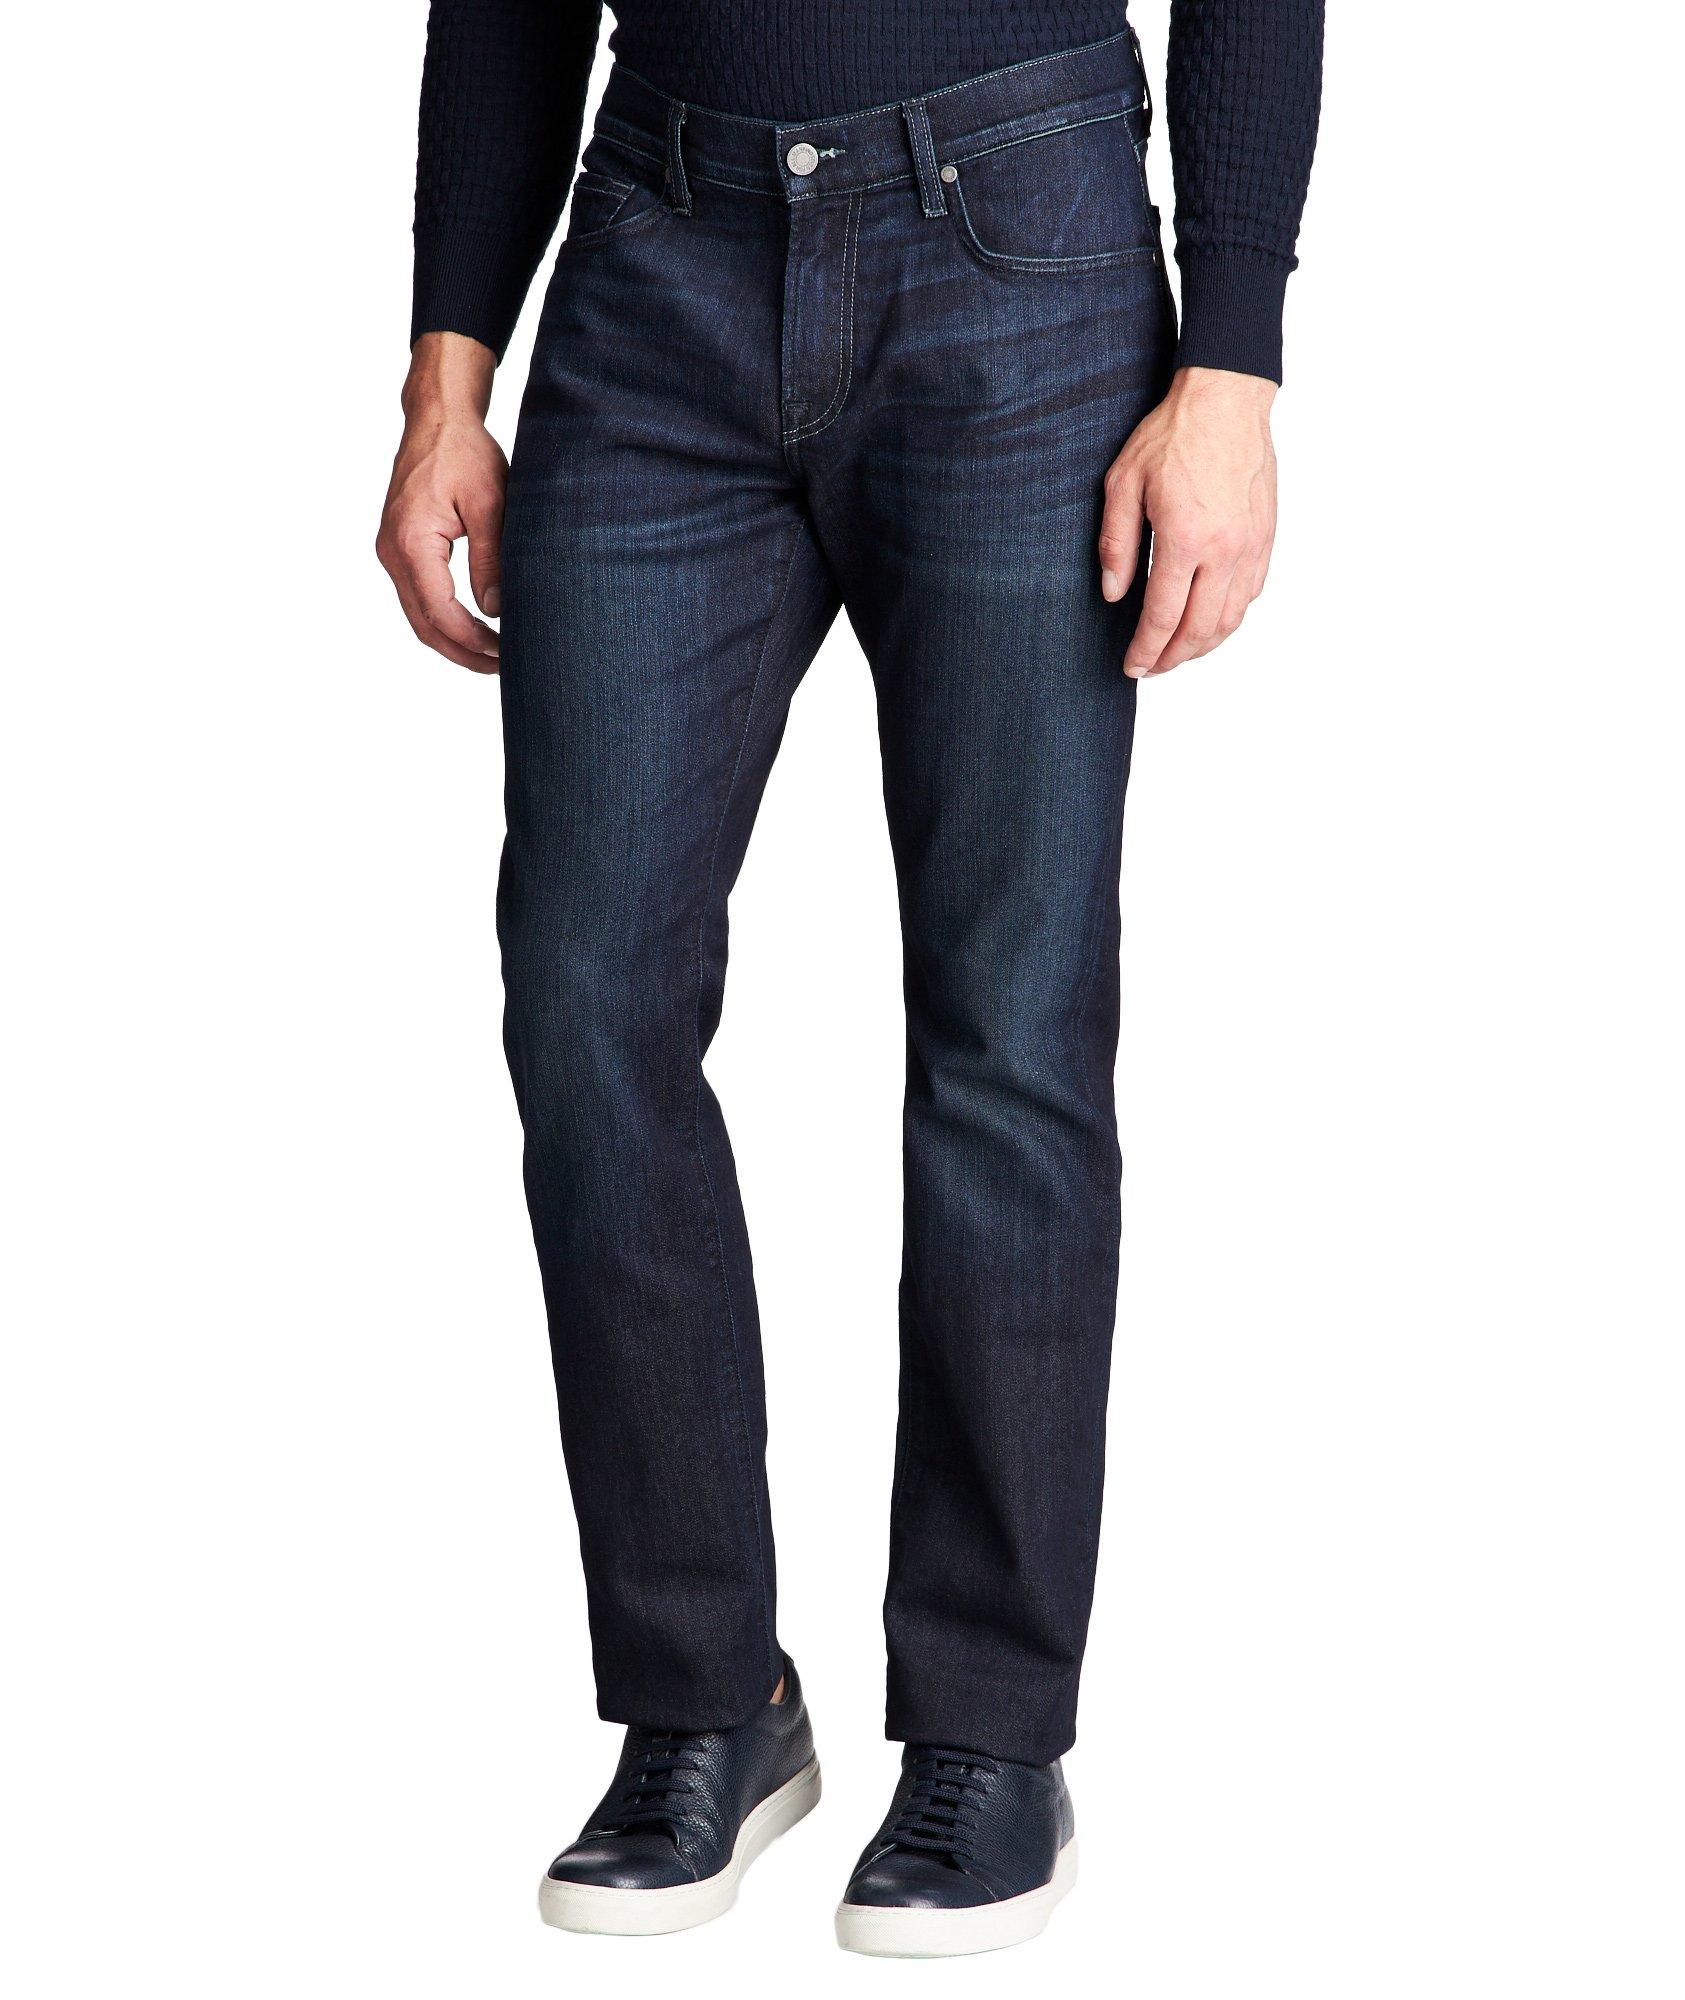 7 for all mankind airweft